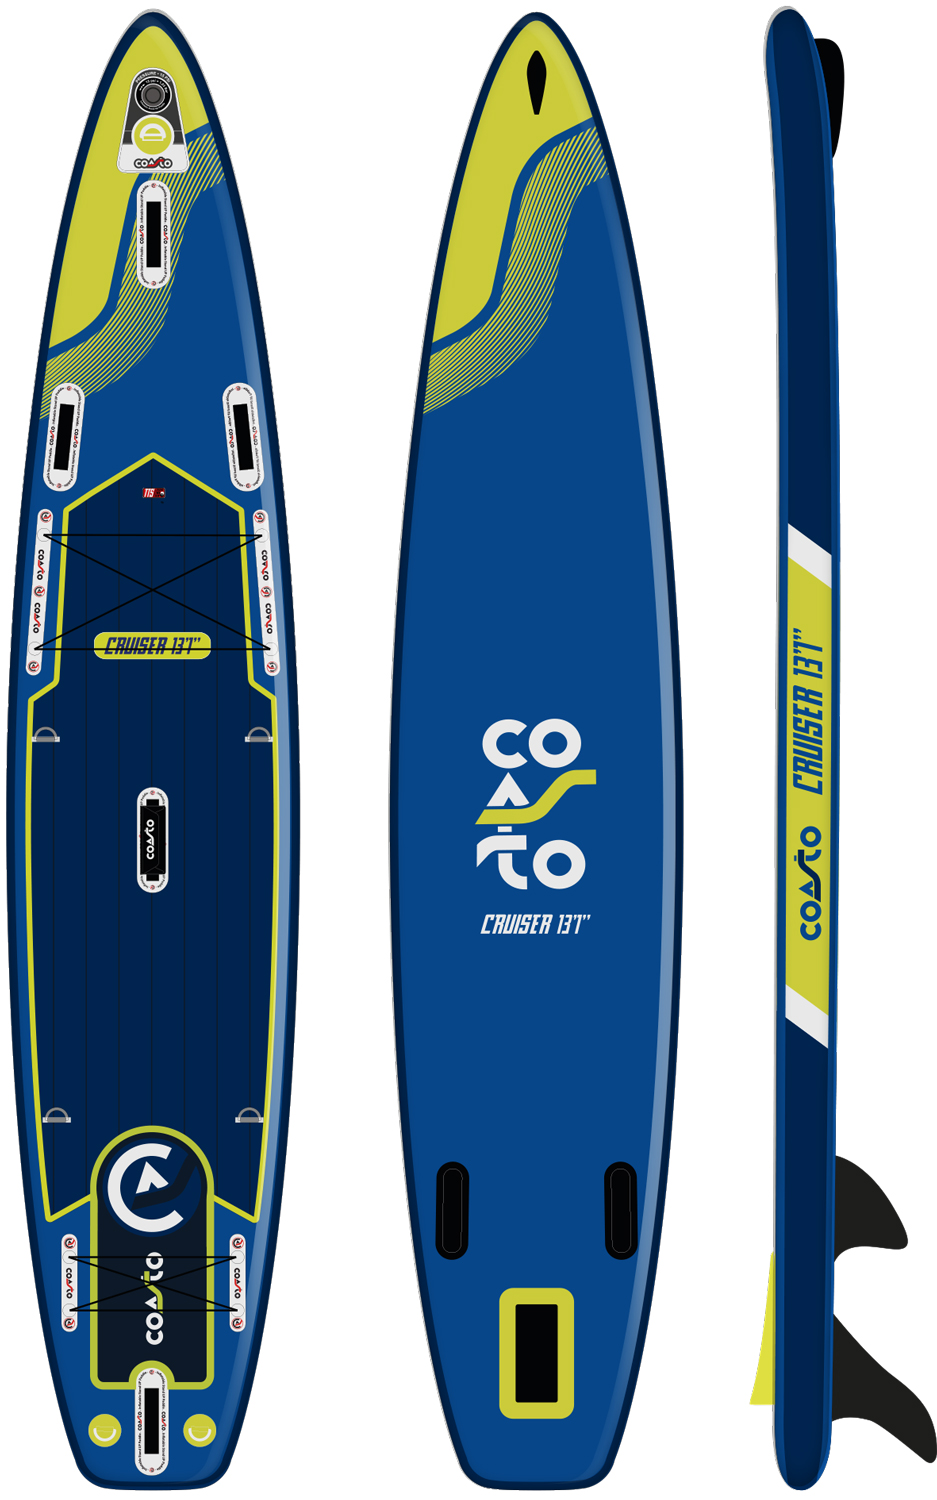 Coasto Cruiser 13’1 Package front side